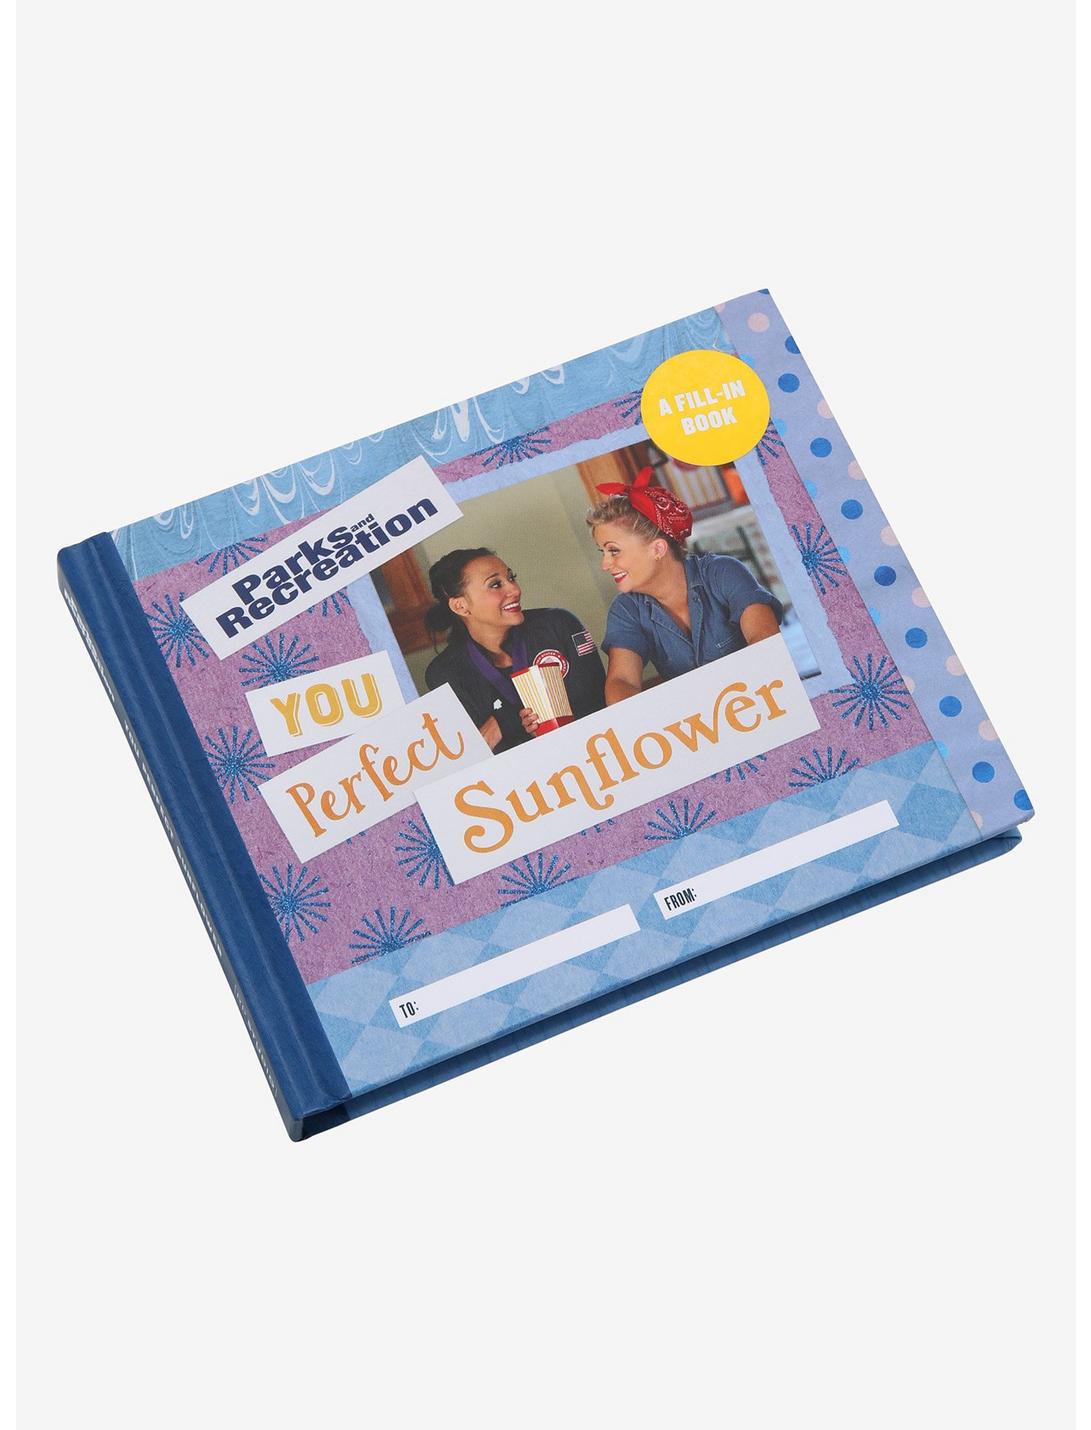 Parks and Recreation: You Perfect Sunflower (A Fill-In Book), , hi-res